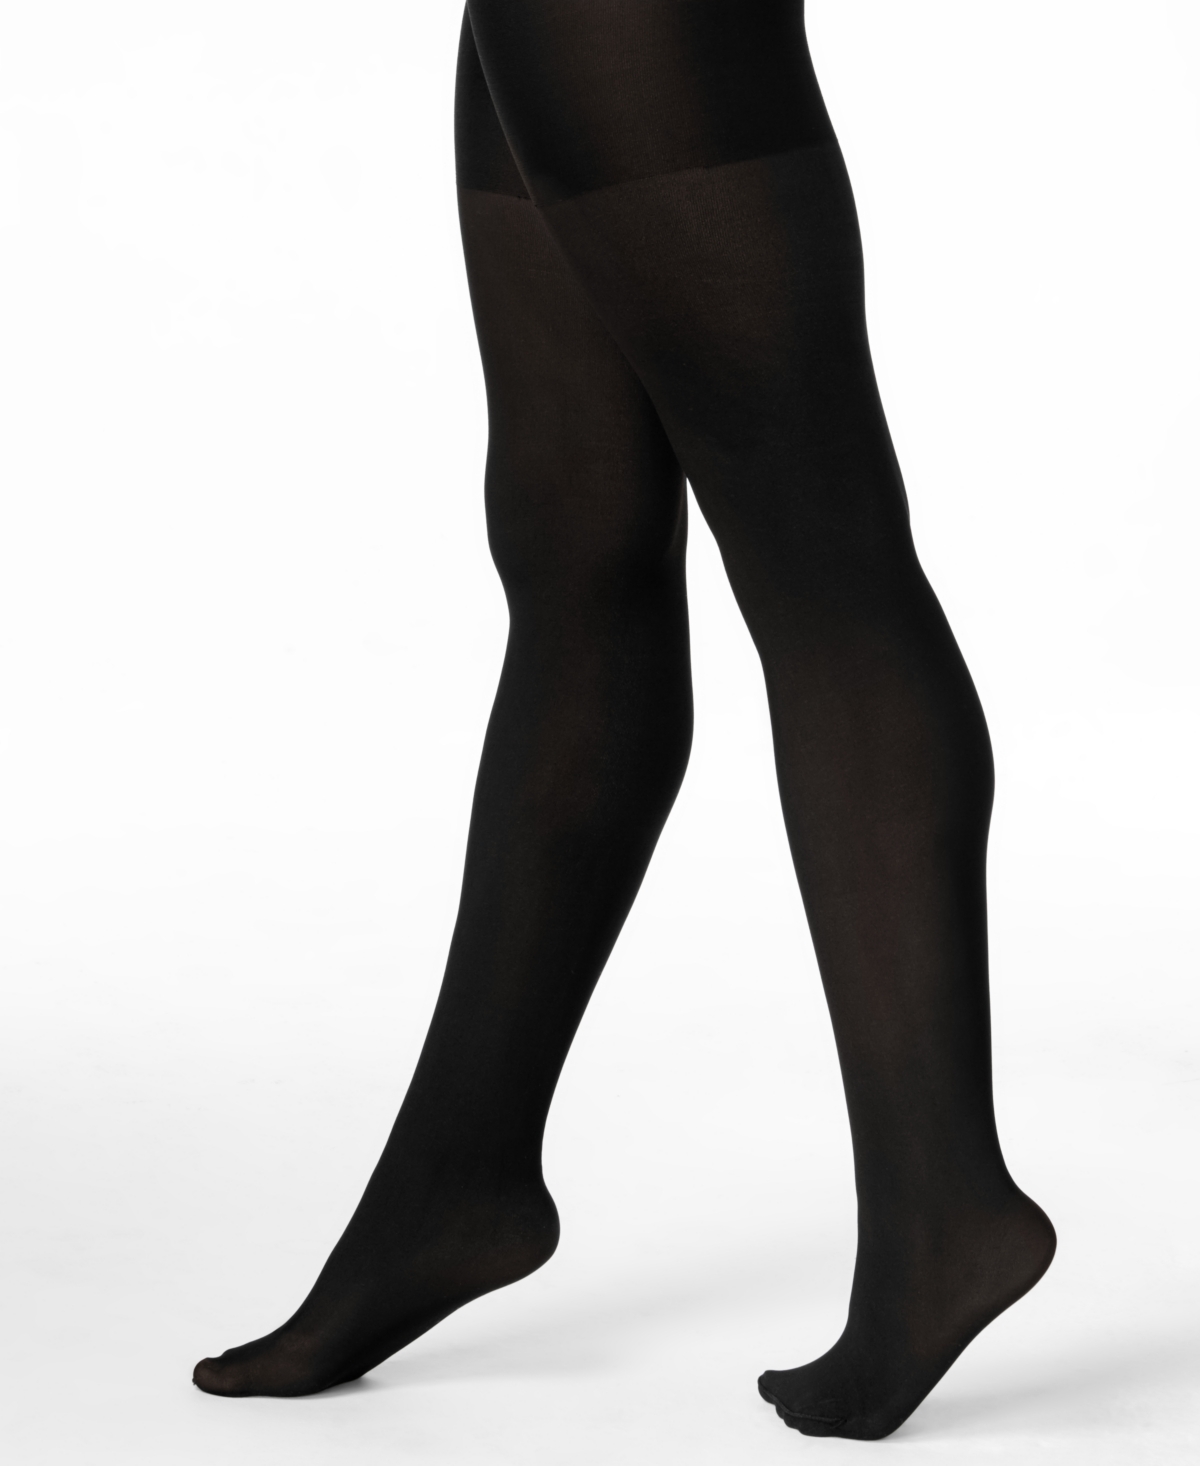 Women's Opaque Reversible Tummy Control Tights, also available in extended sizes - Black/Charcoal